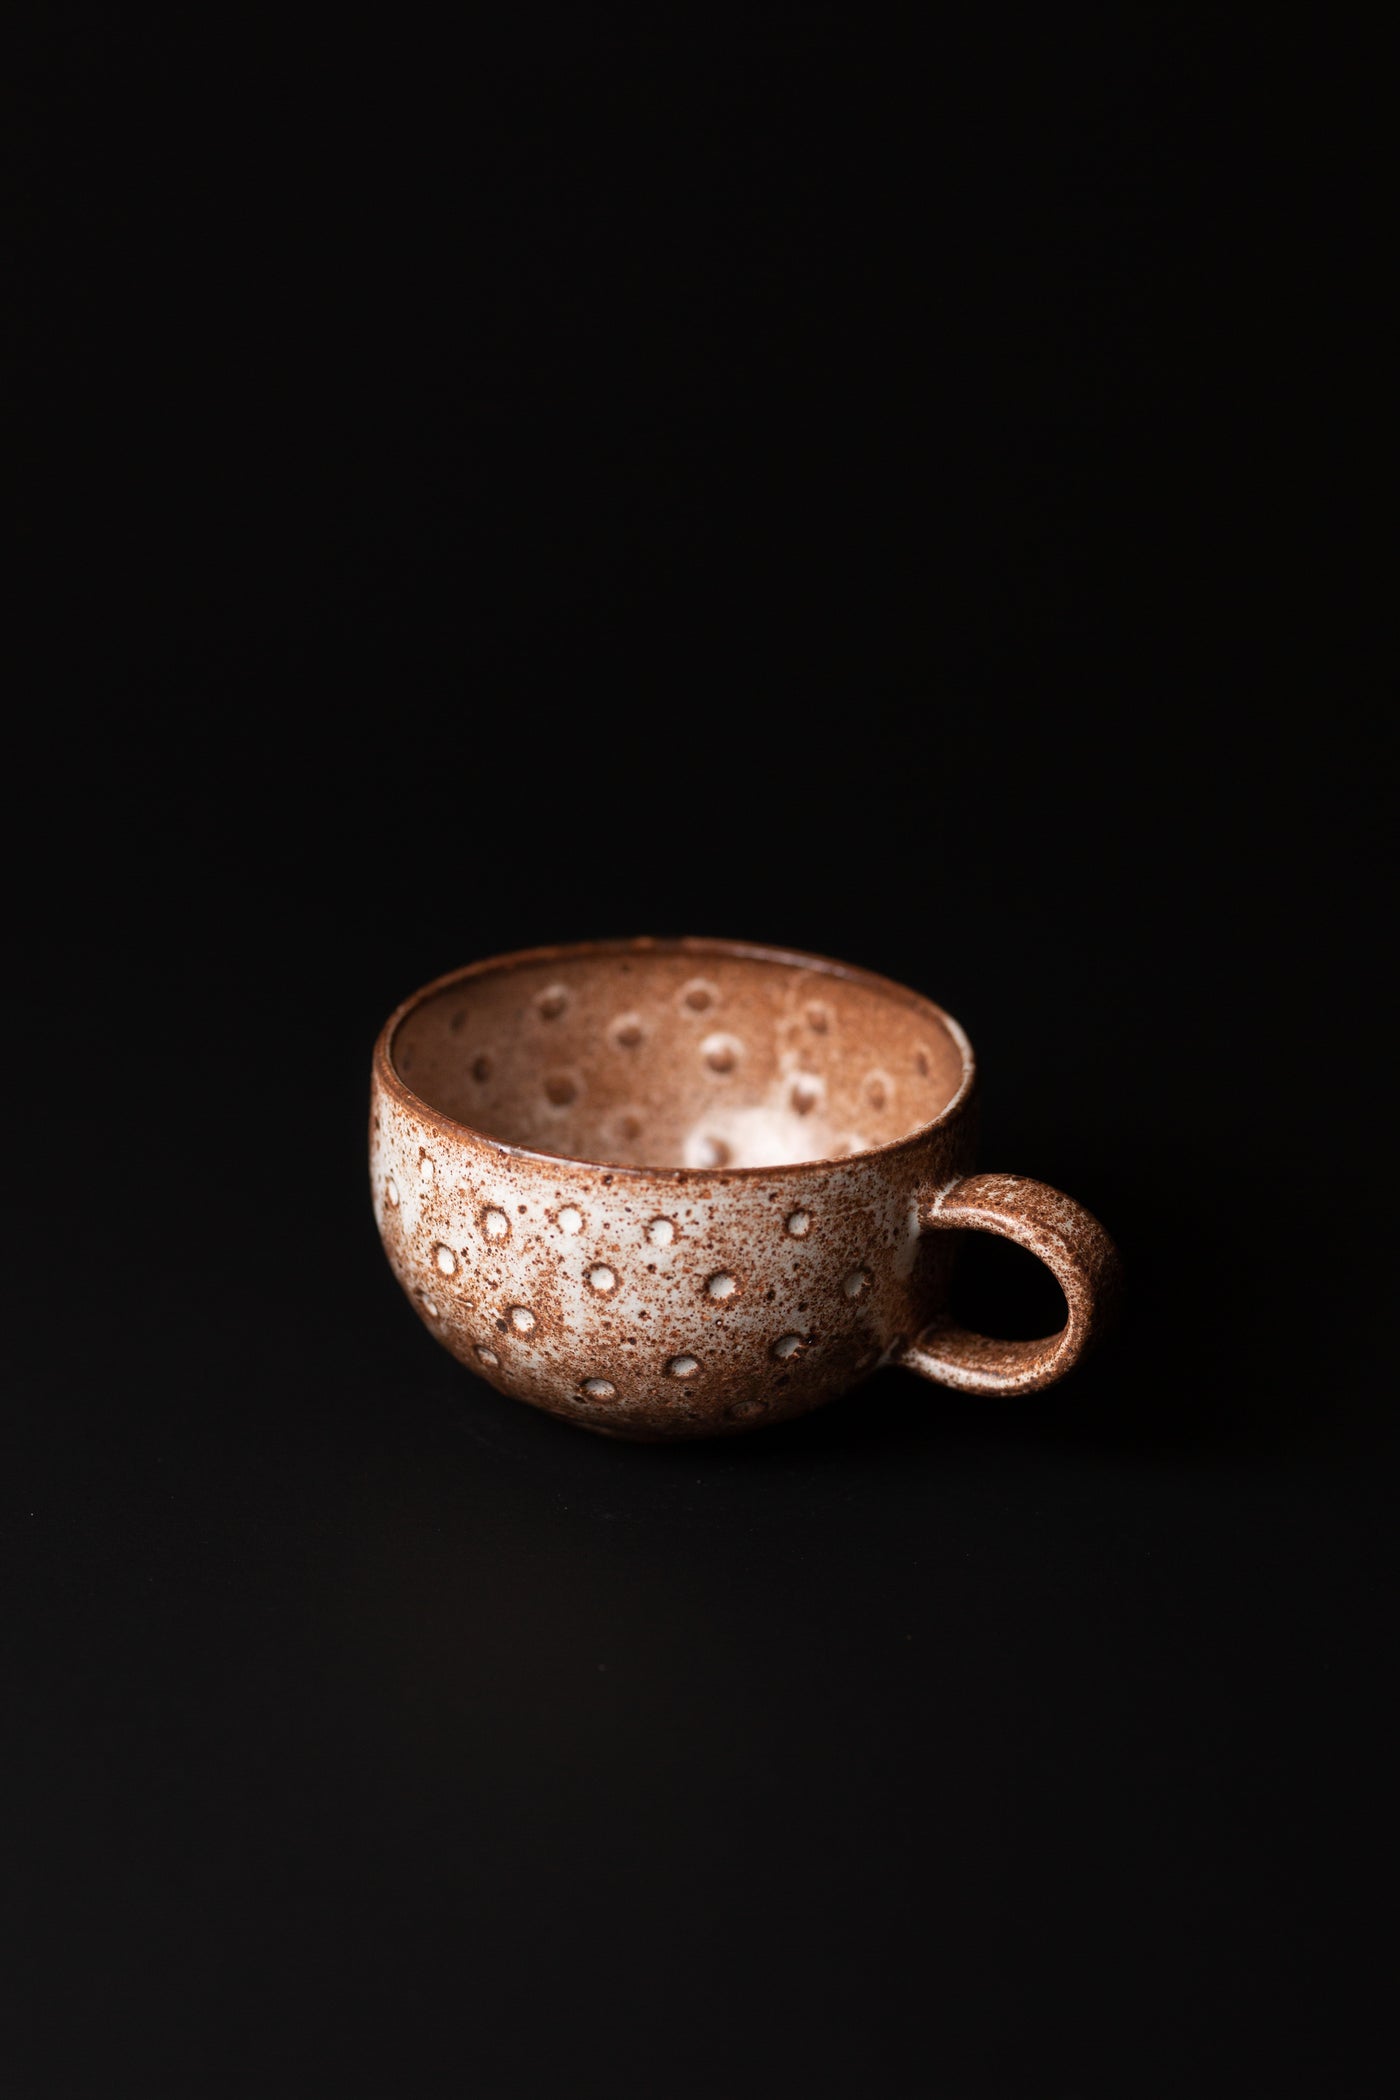 Handcrafted in natural tones and organic in nature this mug is tactile and beautiful to hold. A fine Australian homeware piece.